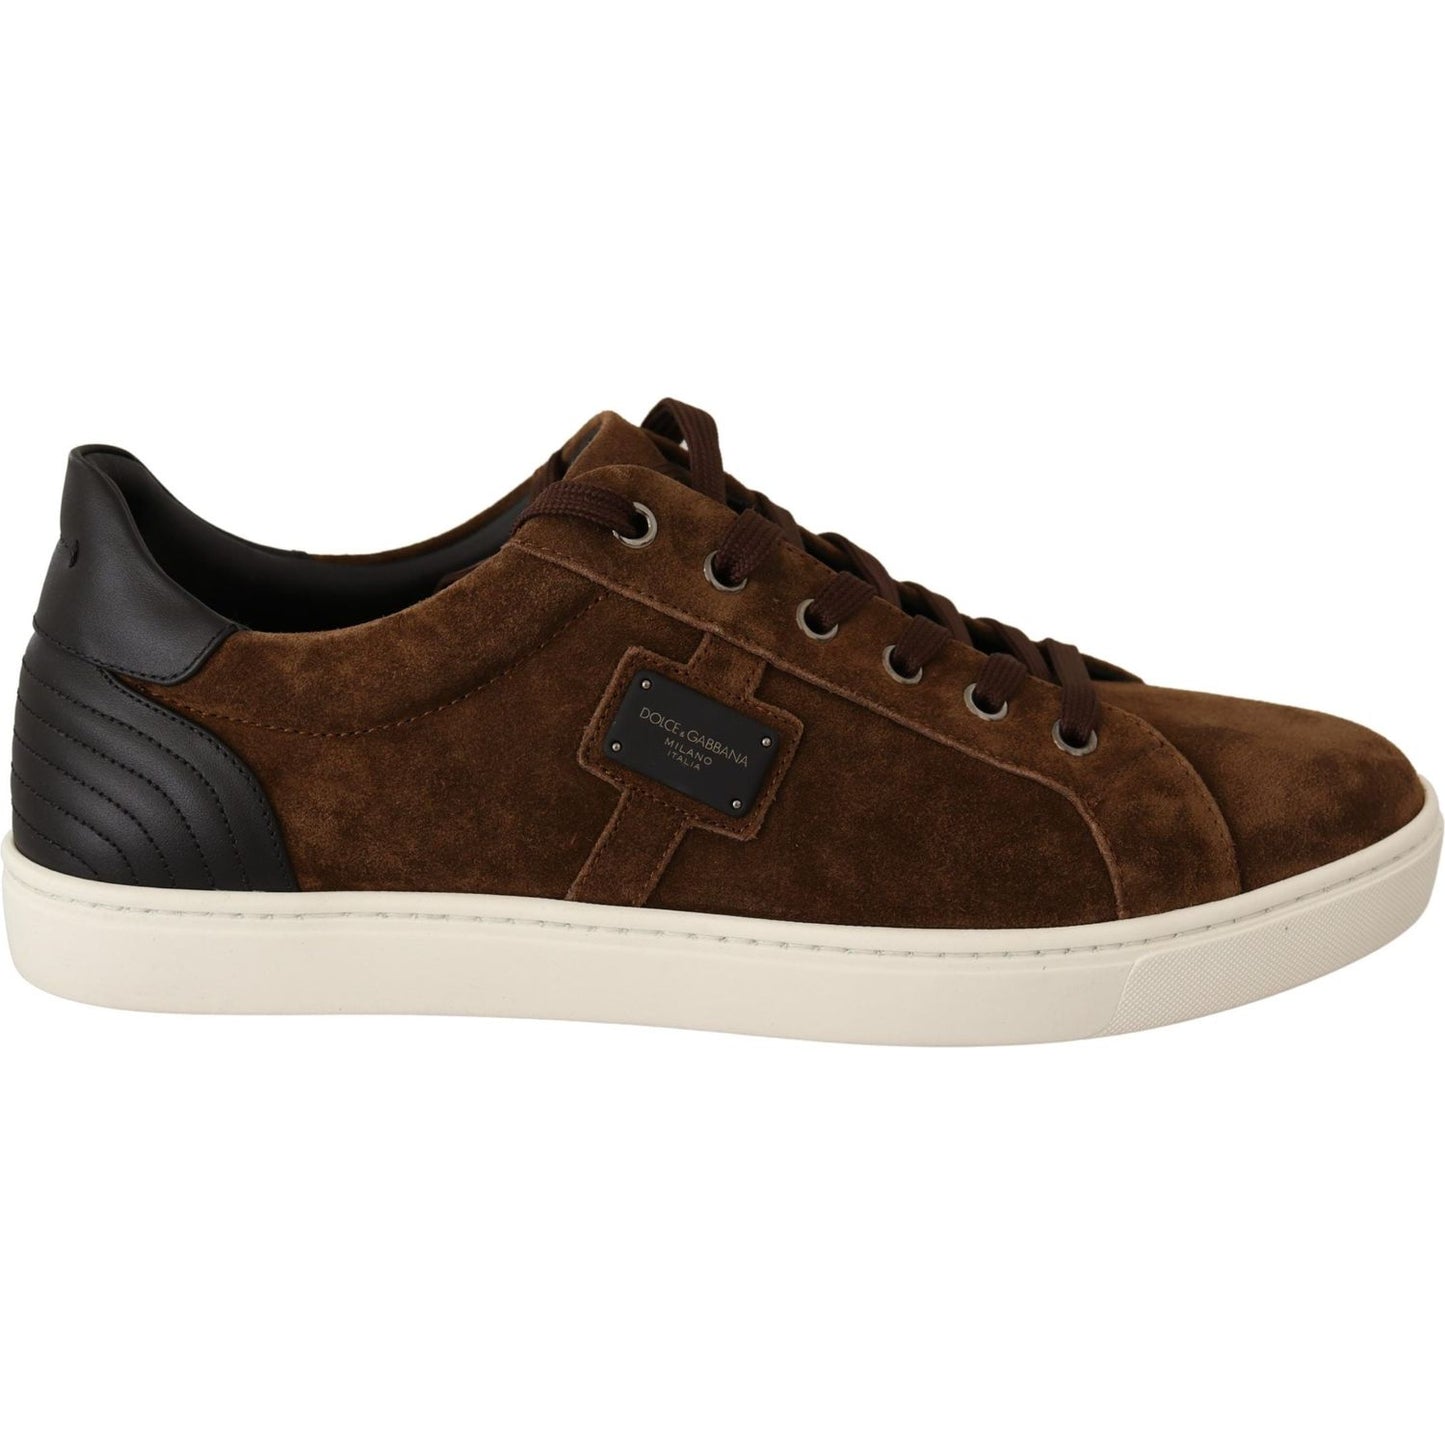 Dolce & Gabbana Elegant Leather Casual Sneakers in Brown brown-suede-leather-mens-low-tops-sneakers